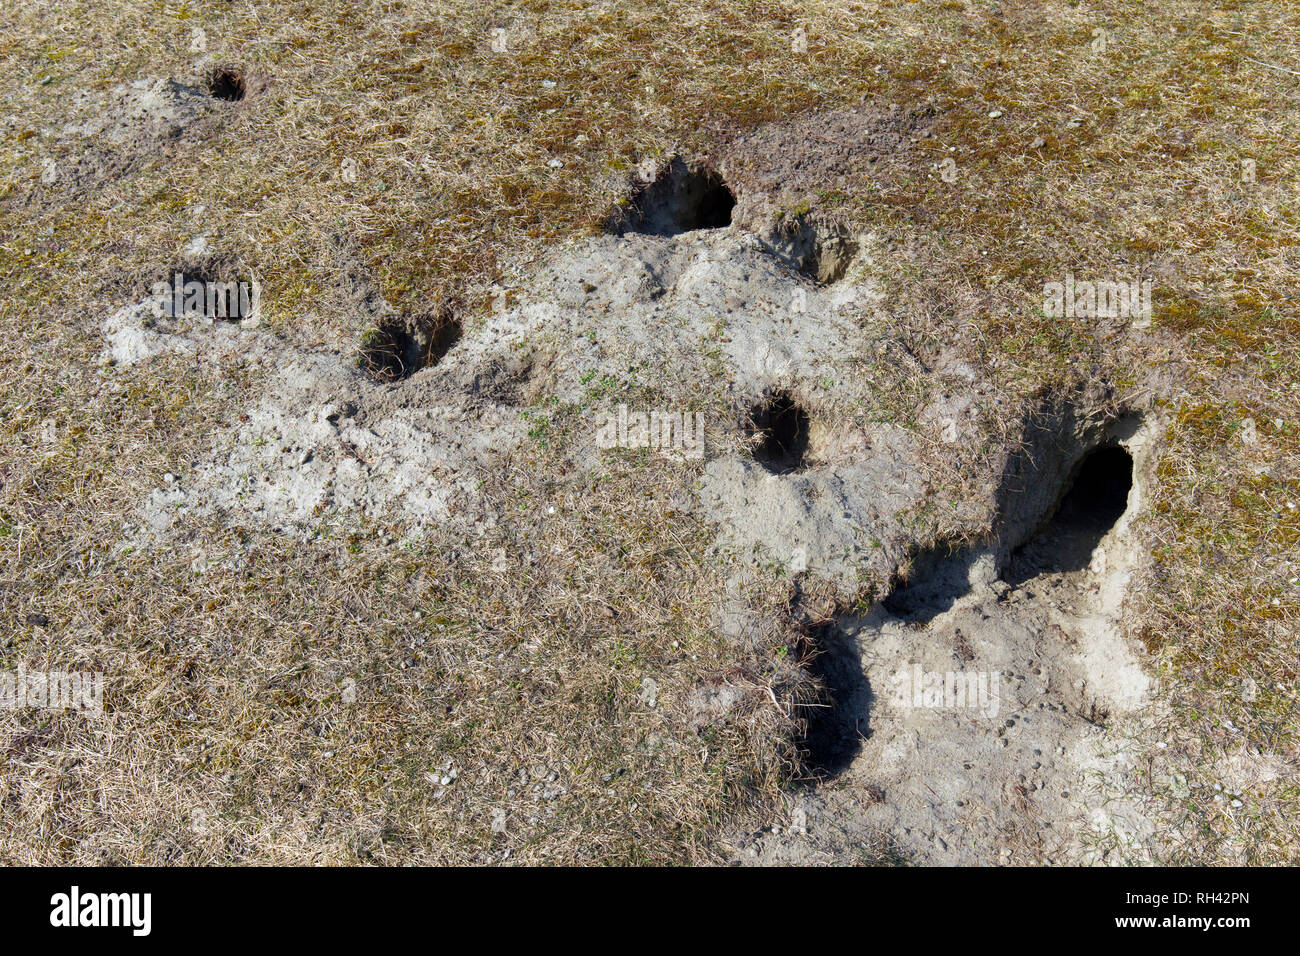 European rabbit (Oryctolagus cuniculus) droppings in front of entrances to burrow / warren in grassland Stock Photo